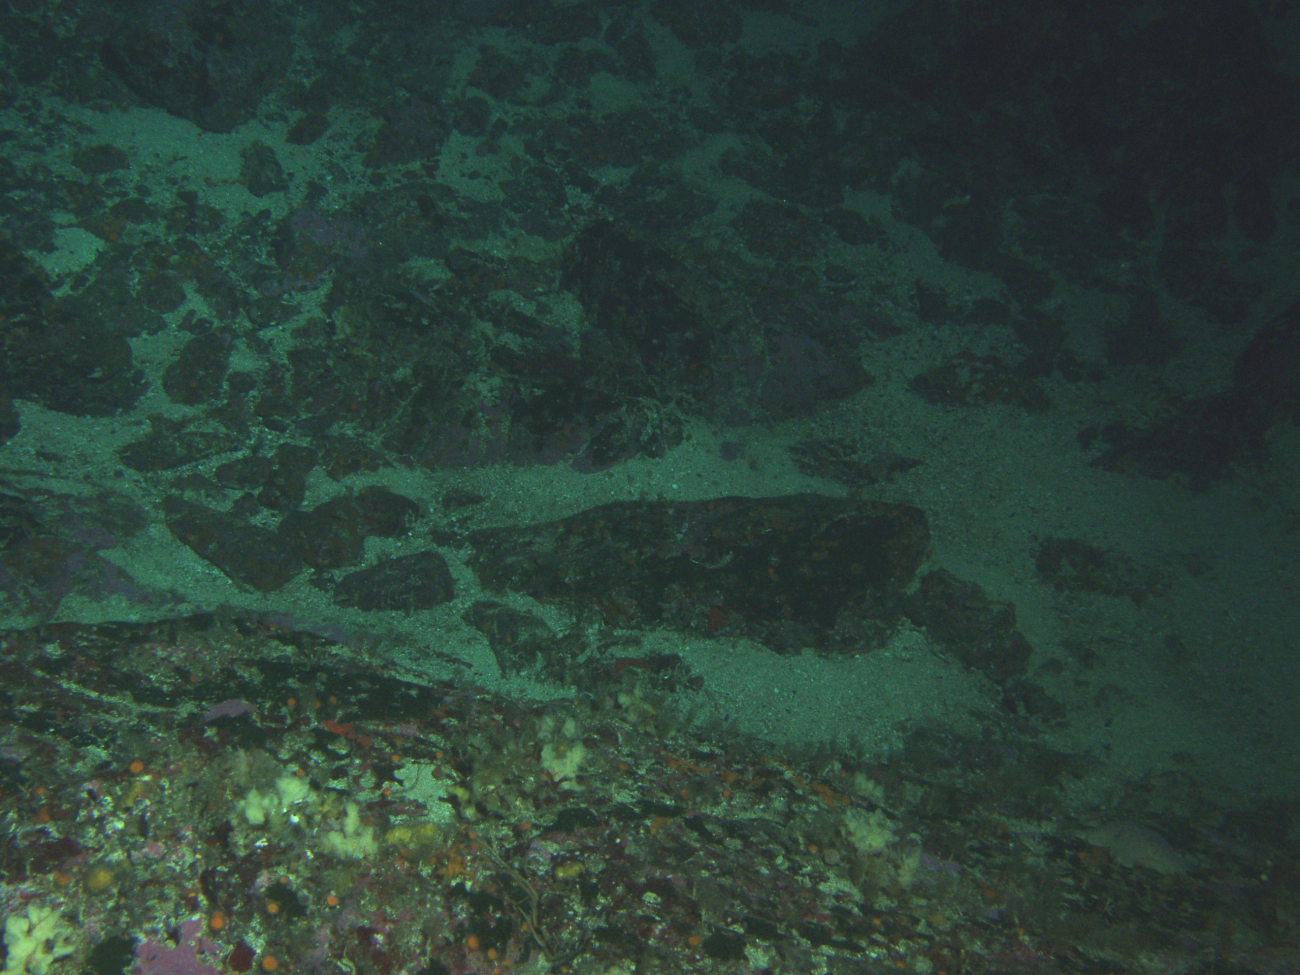 Sand patches within rocky boulder habitat at 57 meters depthLatitude 37 59 N